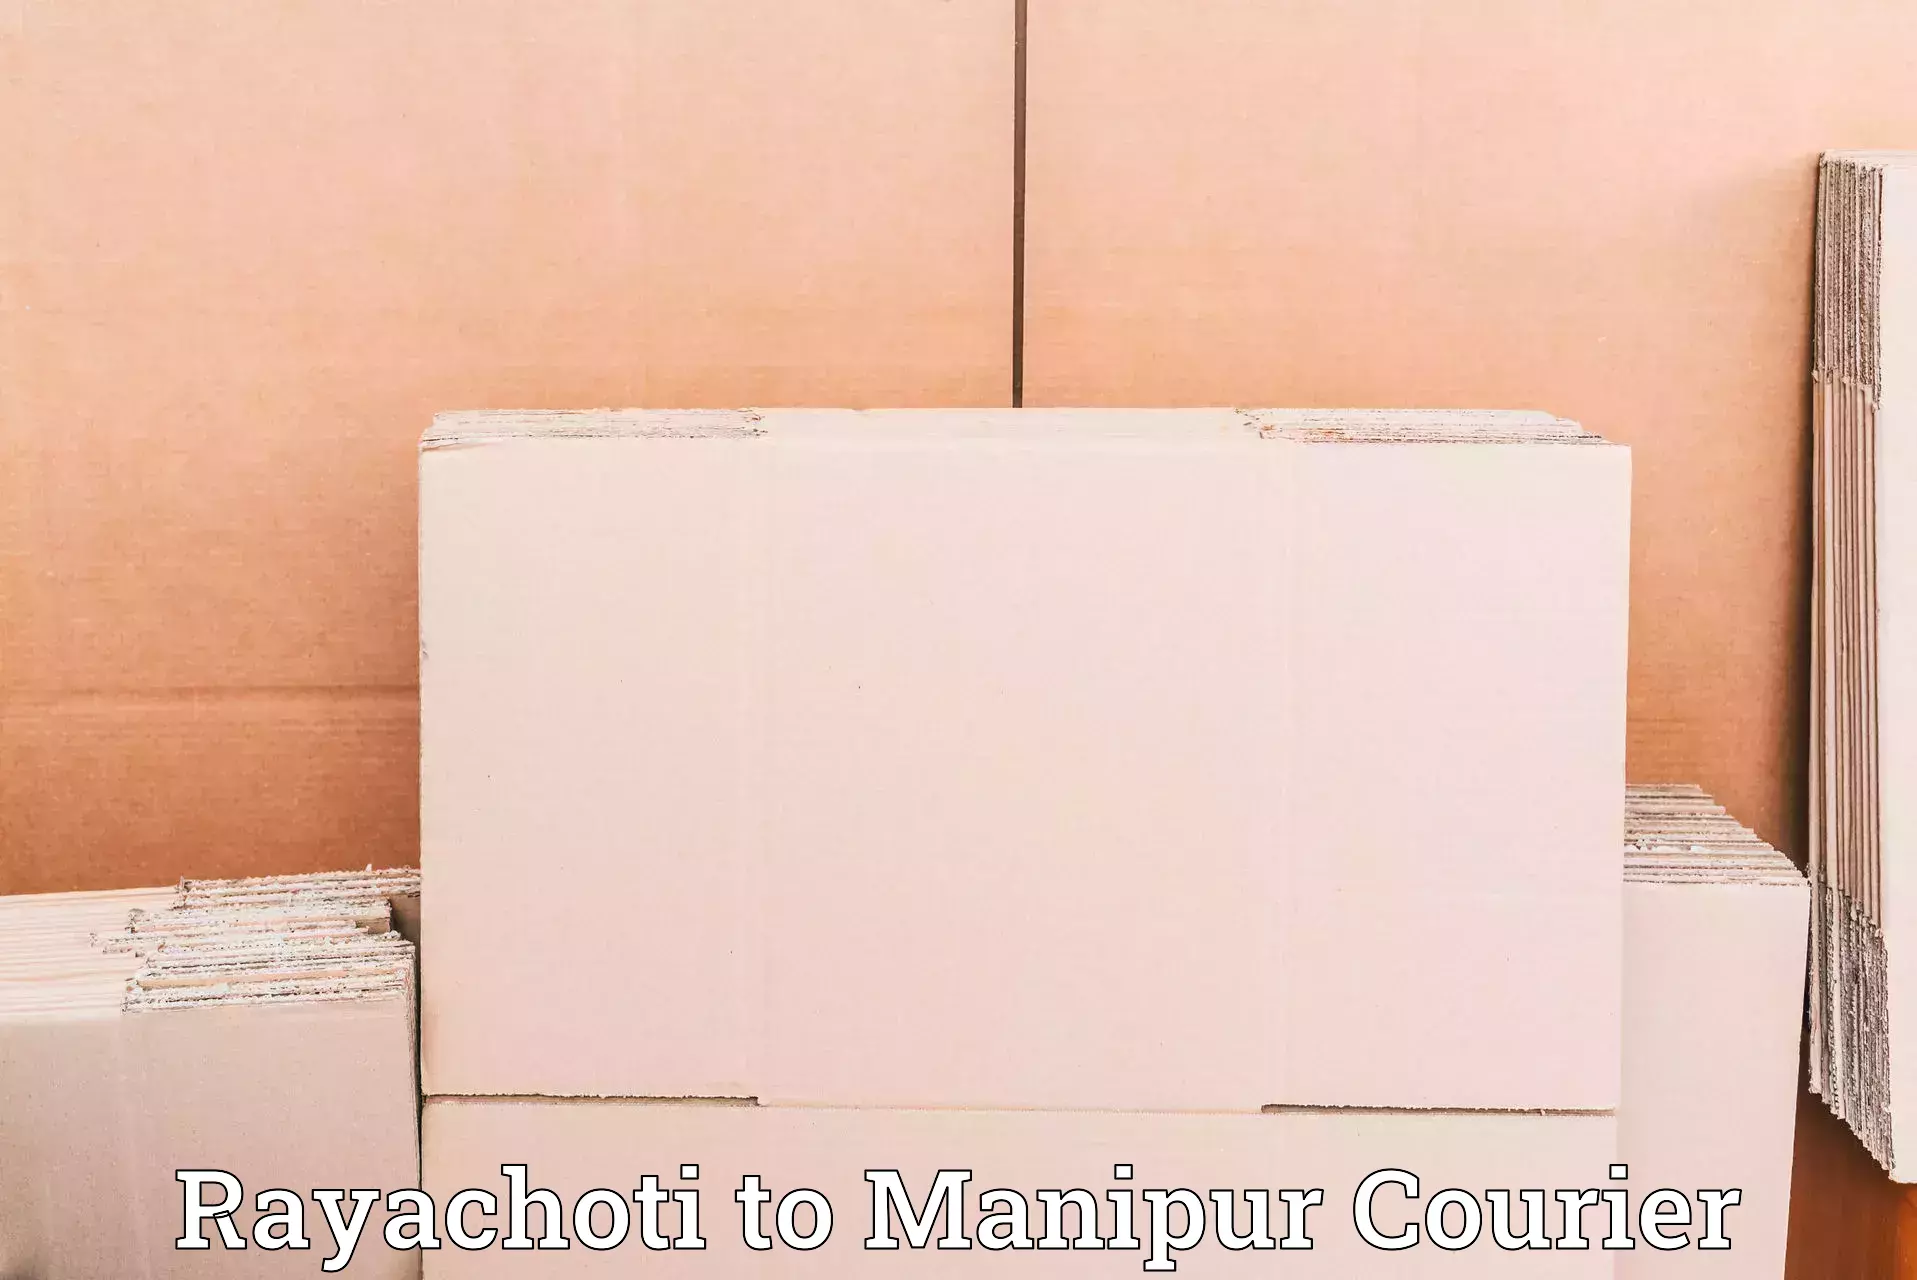 Same-day delivery options Rayachoti to Manipur